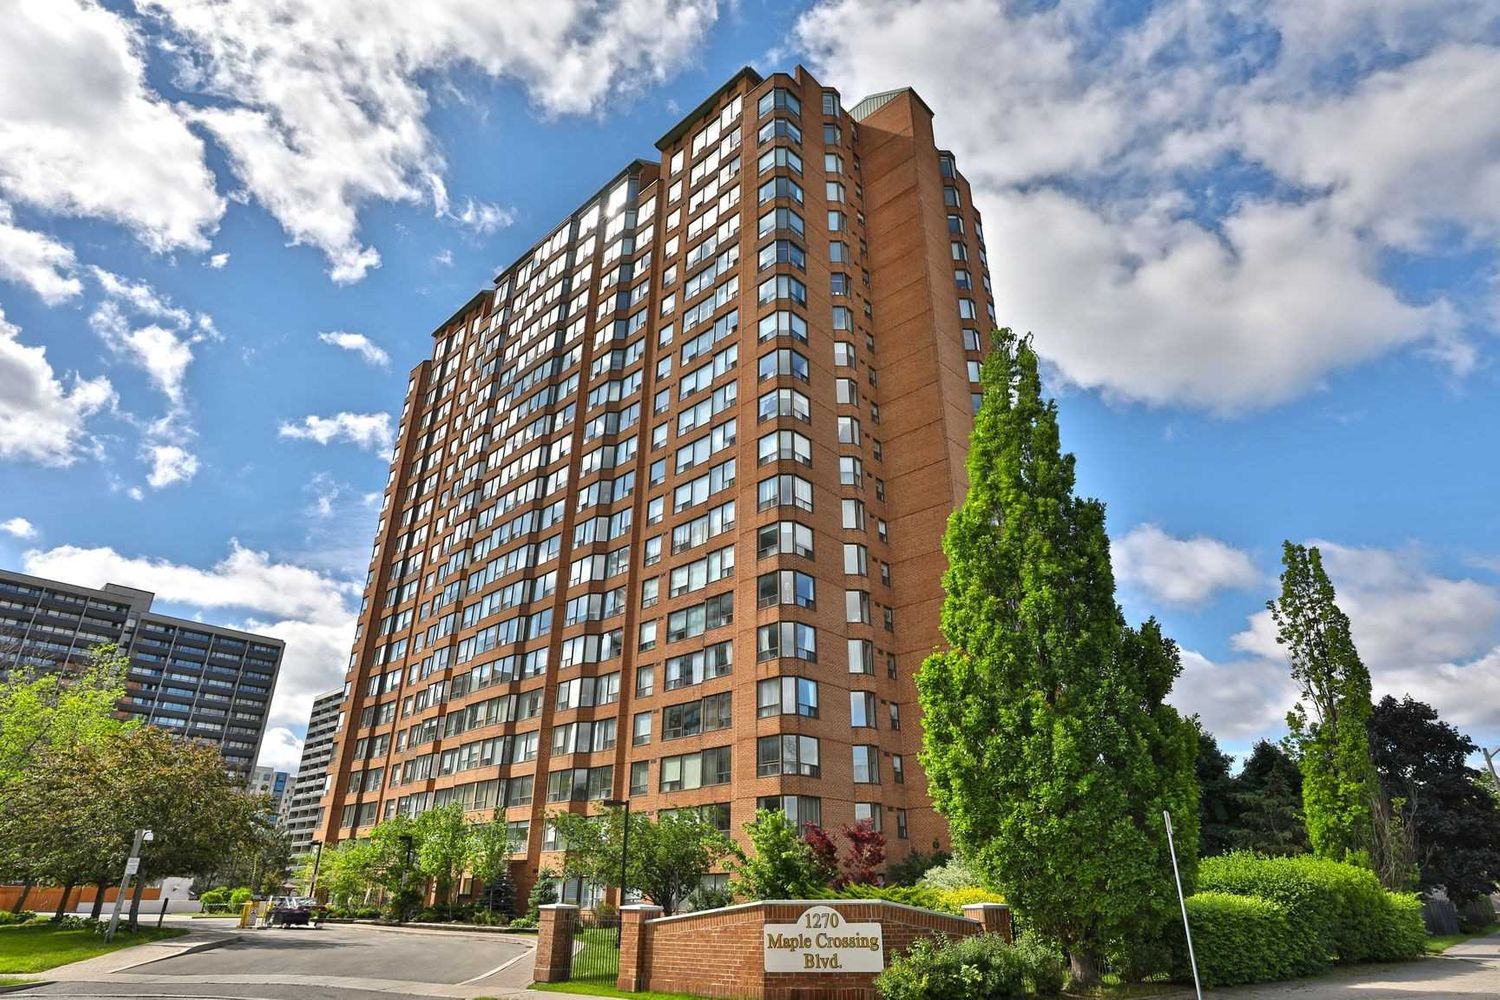 1270 Maple Crossing Boulevard. The Palace Condo is located in  Burlington, Toronto - image #1 of 3